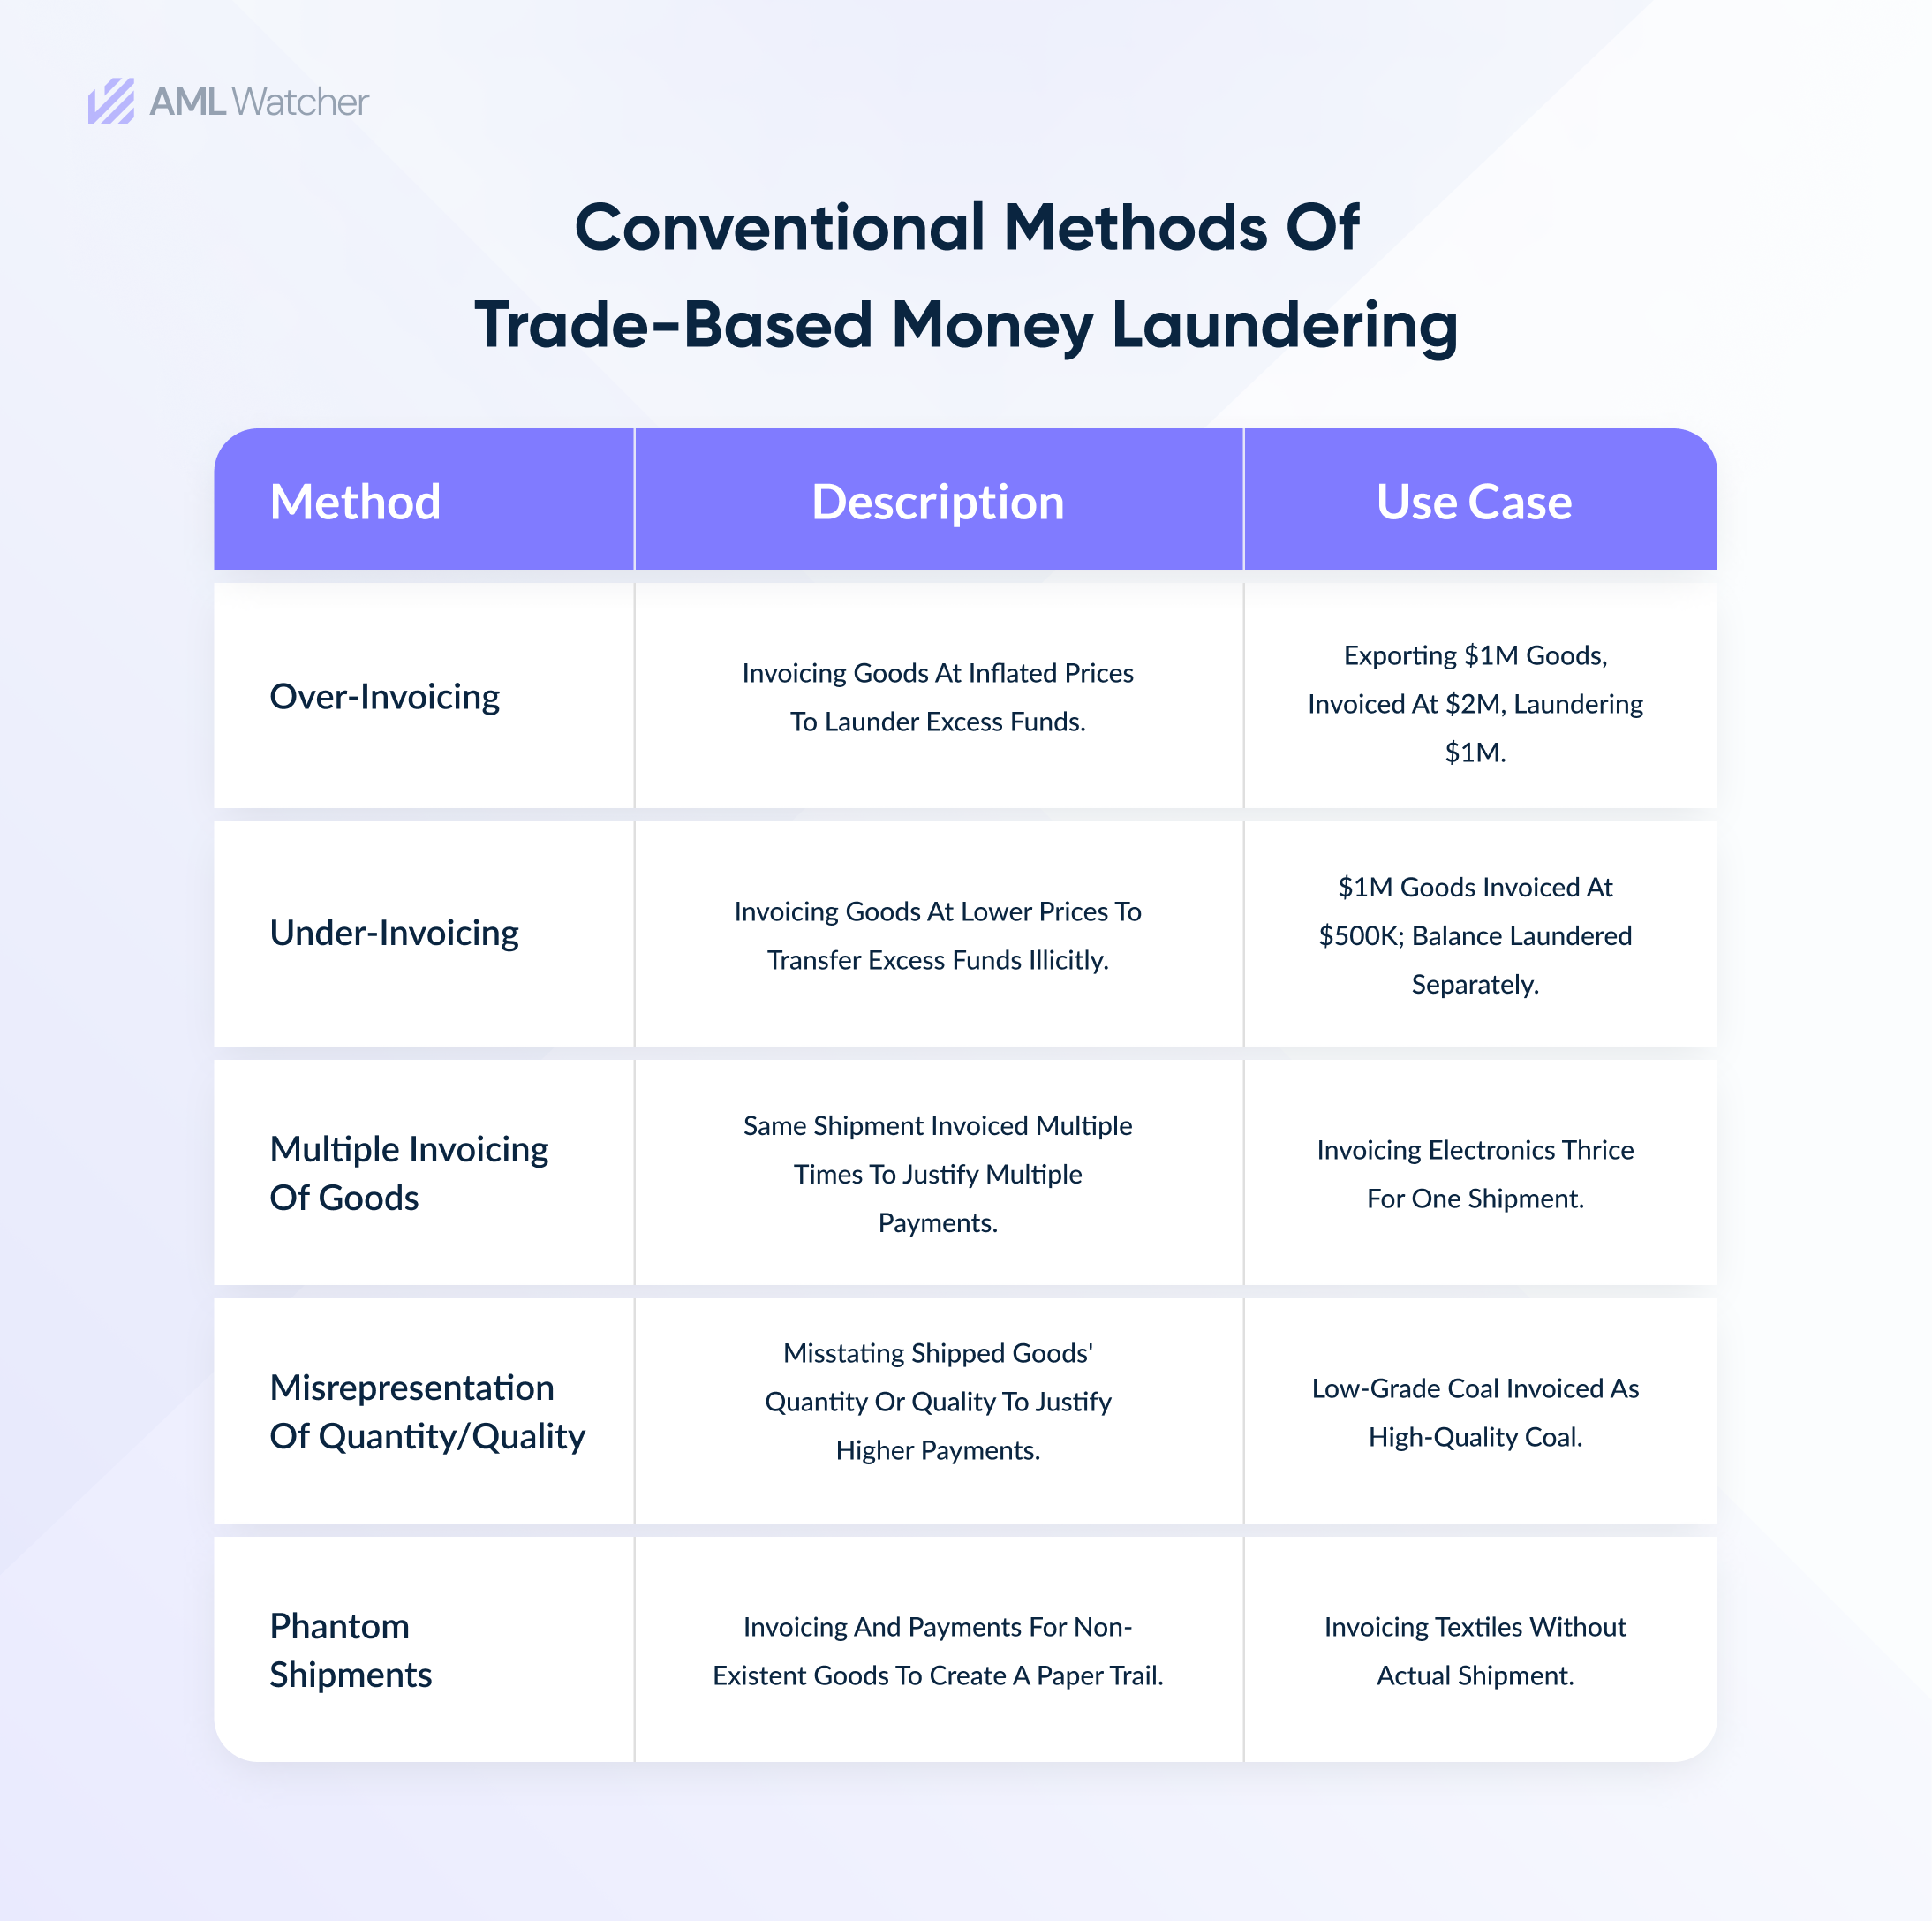 The featured table describes the method used to launder money through trade-based laundering. It also includes the use cases of each method.